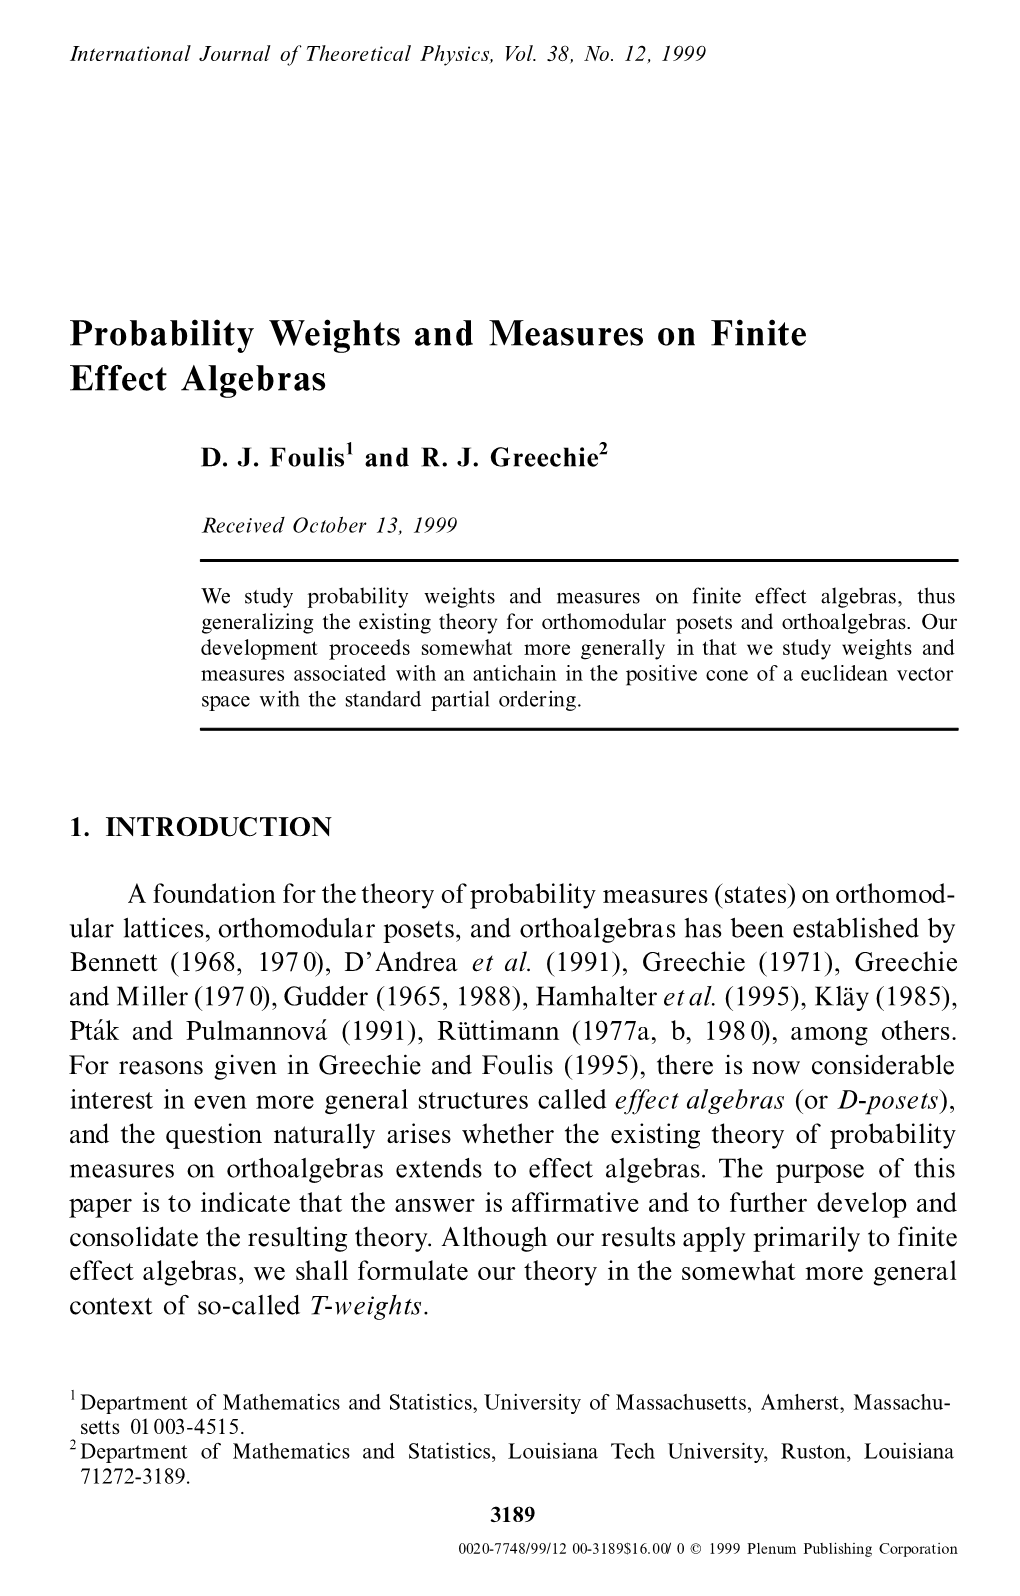 Probability Weights and Measures on Finite Effect Algebras